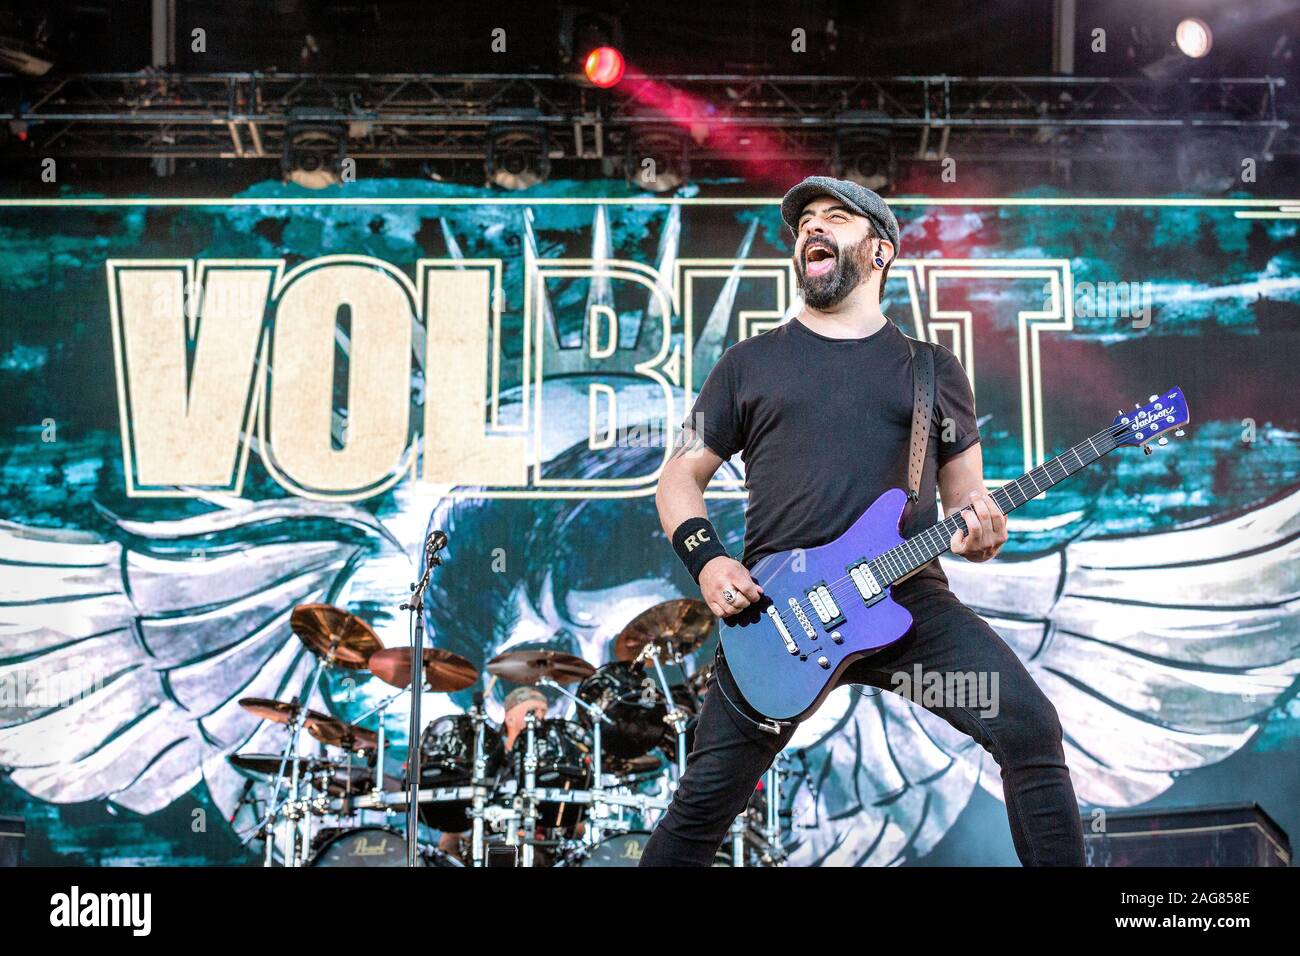 Oslo, Norway. 28th, June 2019. The Danish hard rock band Volbeat performs a live concert during the Norwegian music festival Tons of Rock 2019 in Oslo. Here guitarist Rob Caggiano is seen live on stage. (Photo credit: Gonzales Photo - Terje Dokken). Stock Photo